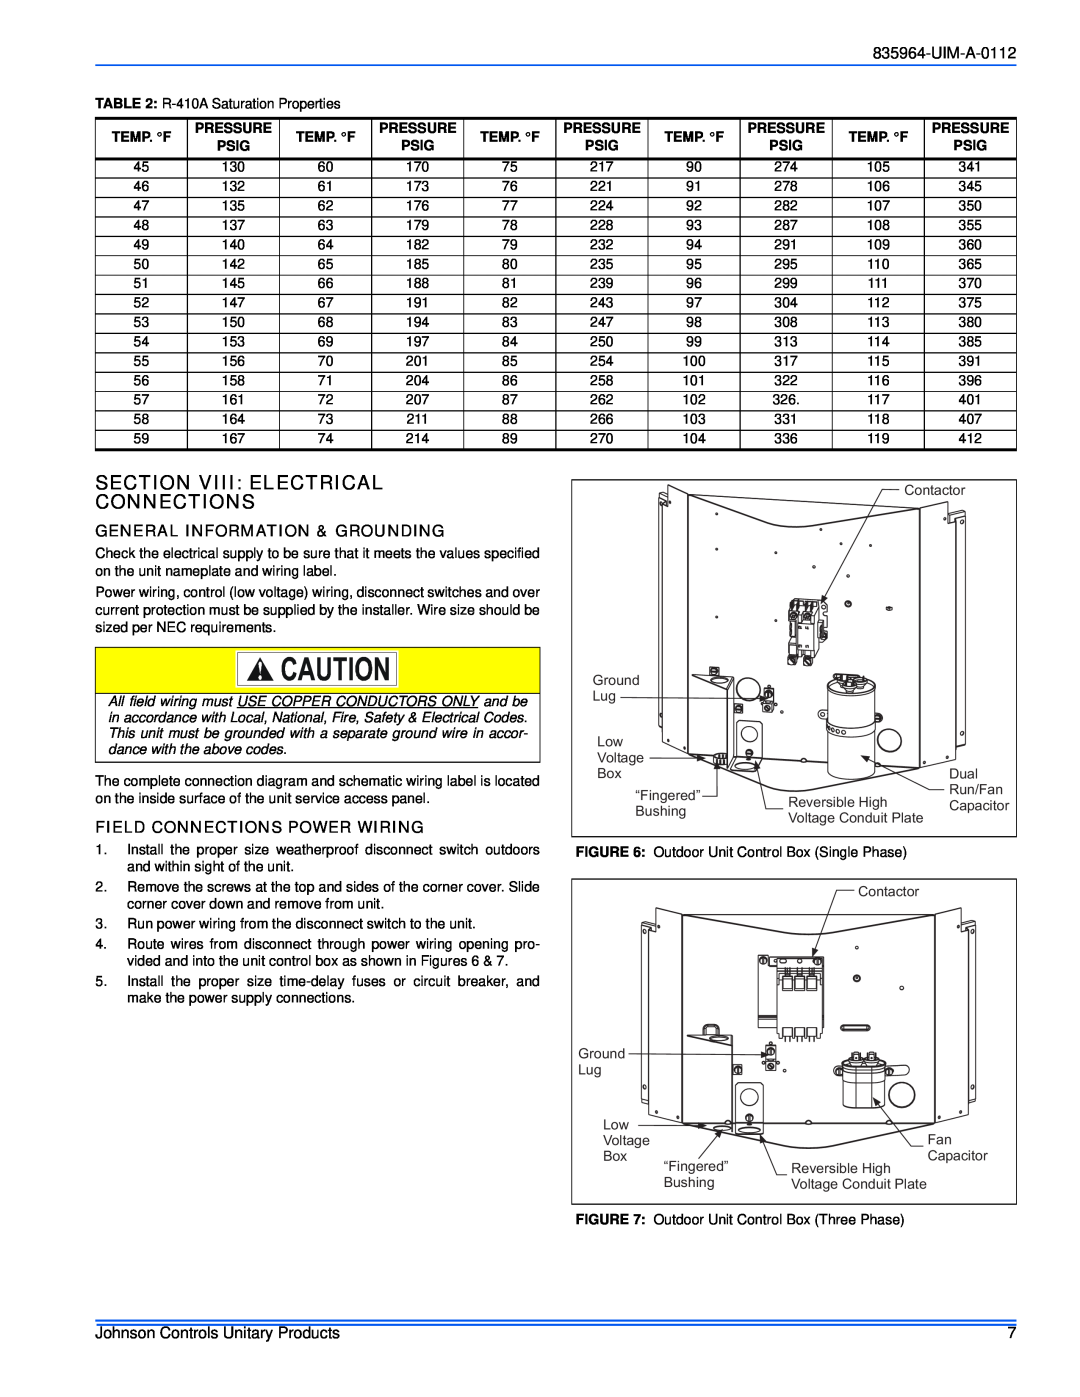 Johnson Controls R-410A Section Viii Electrical Connections, General Information & Grounding, UIM-A-0112 